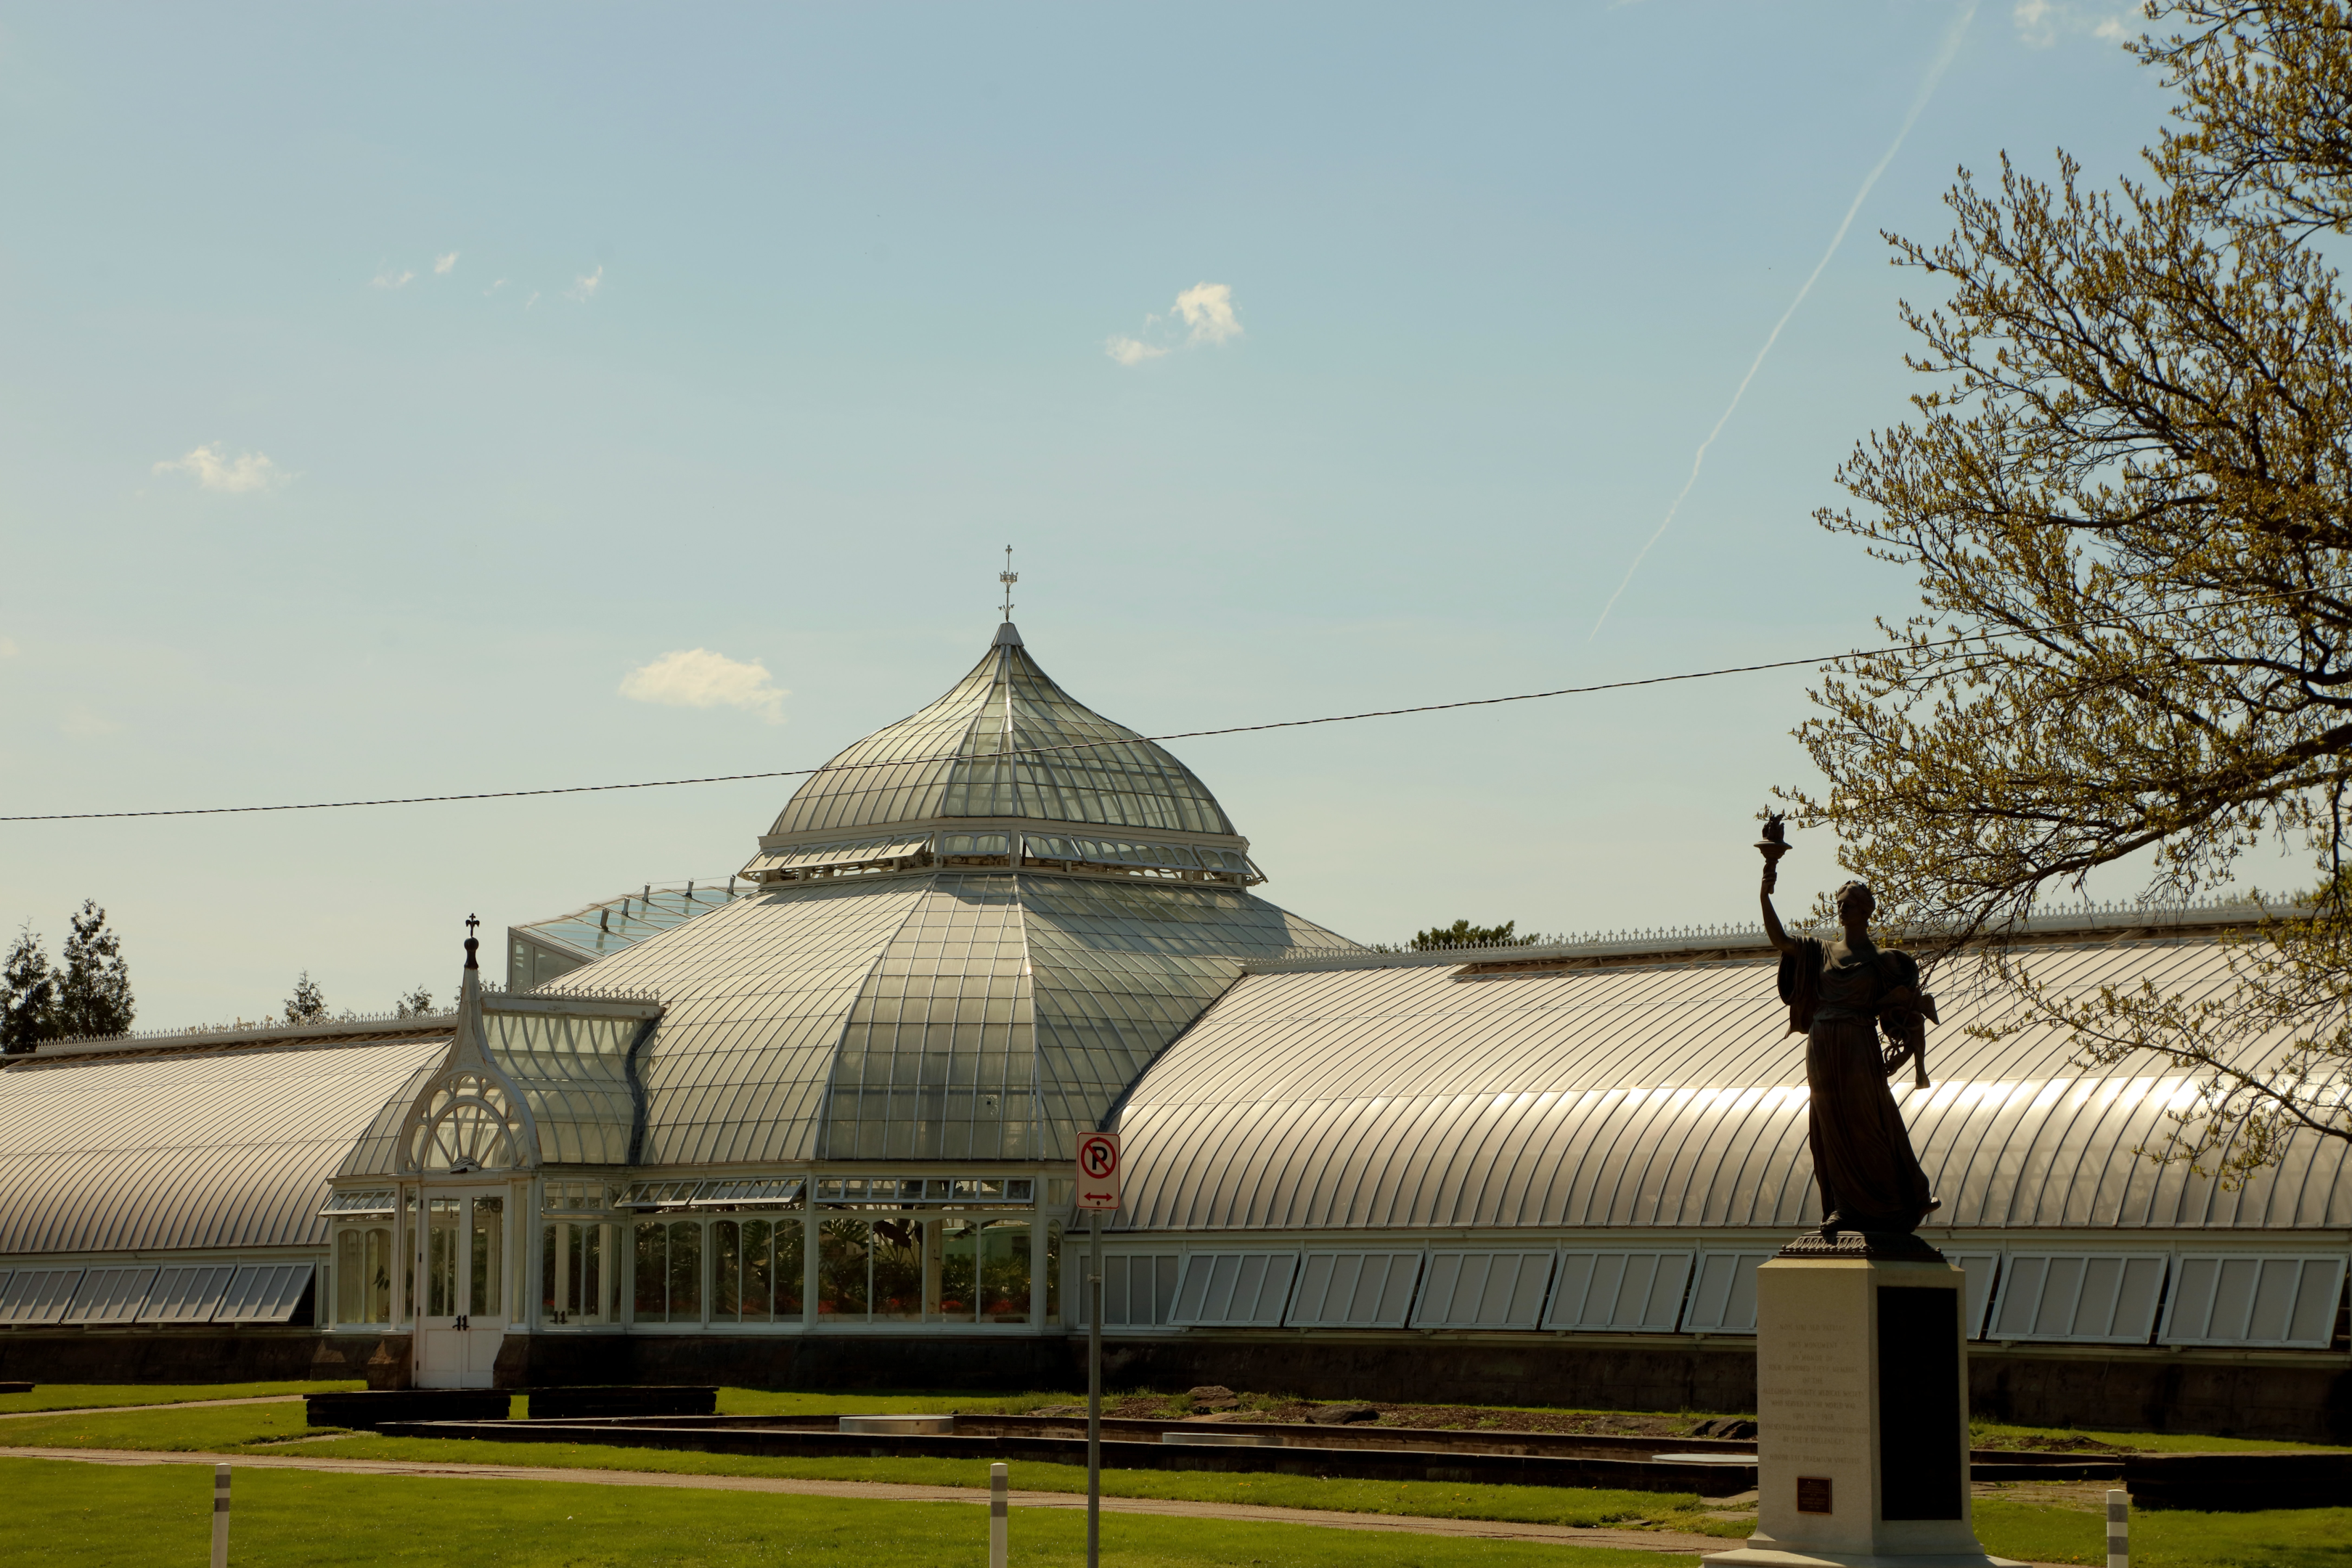 Phipps Conservatory and Botanical Gardens